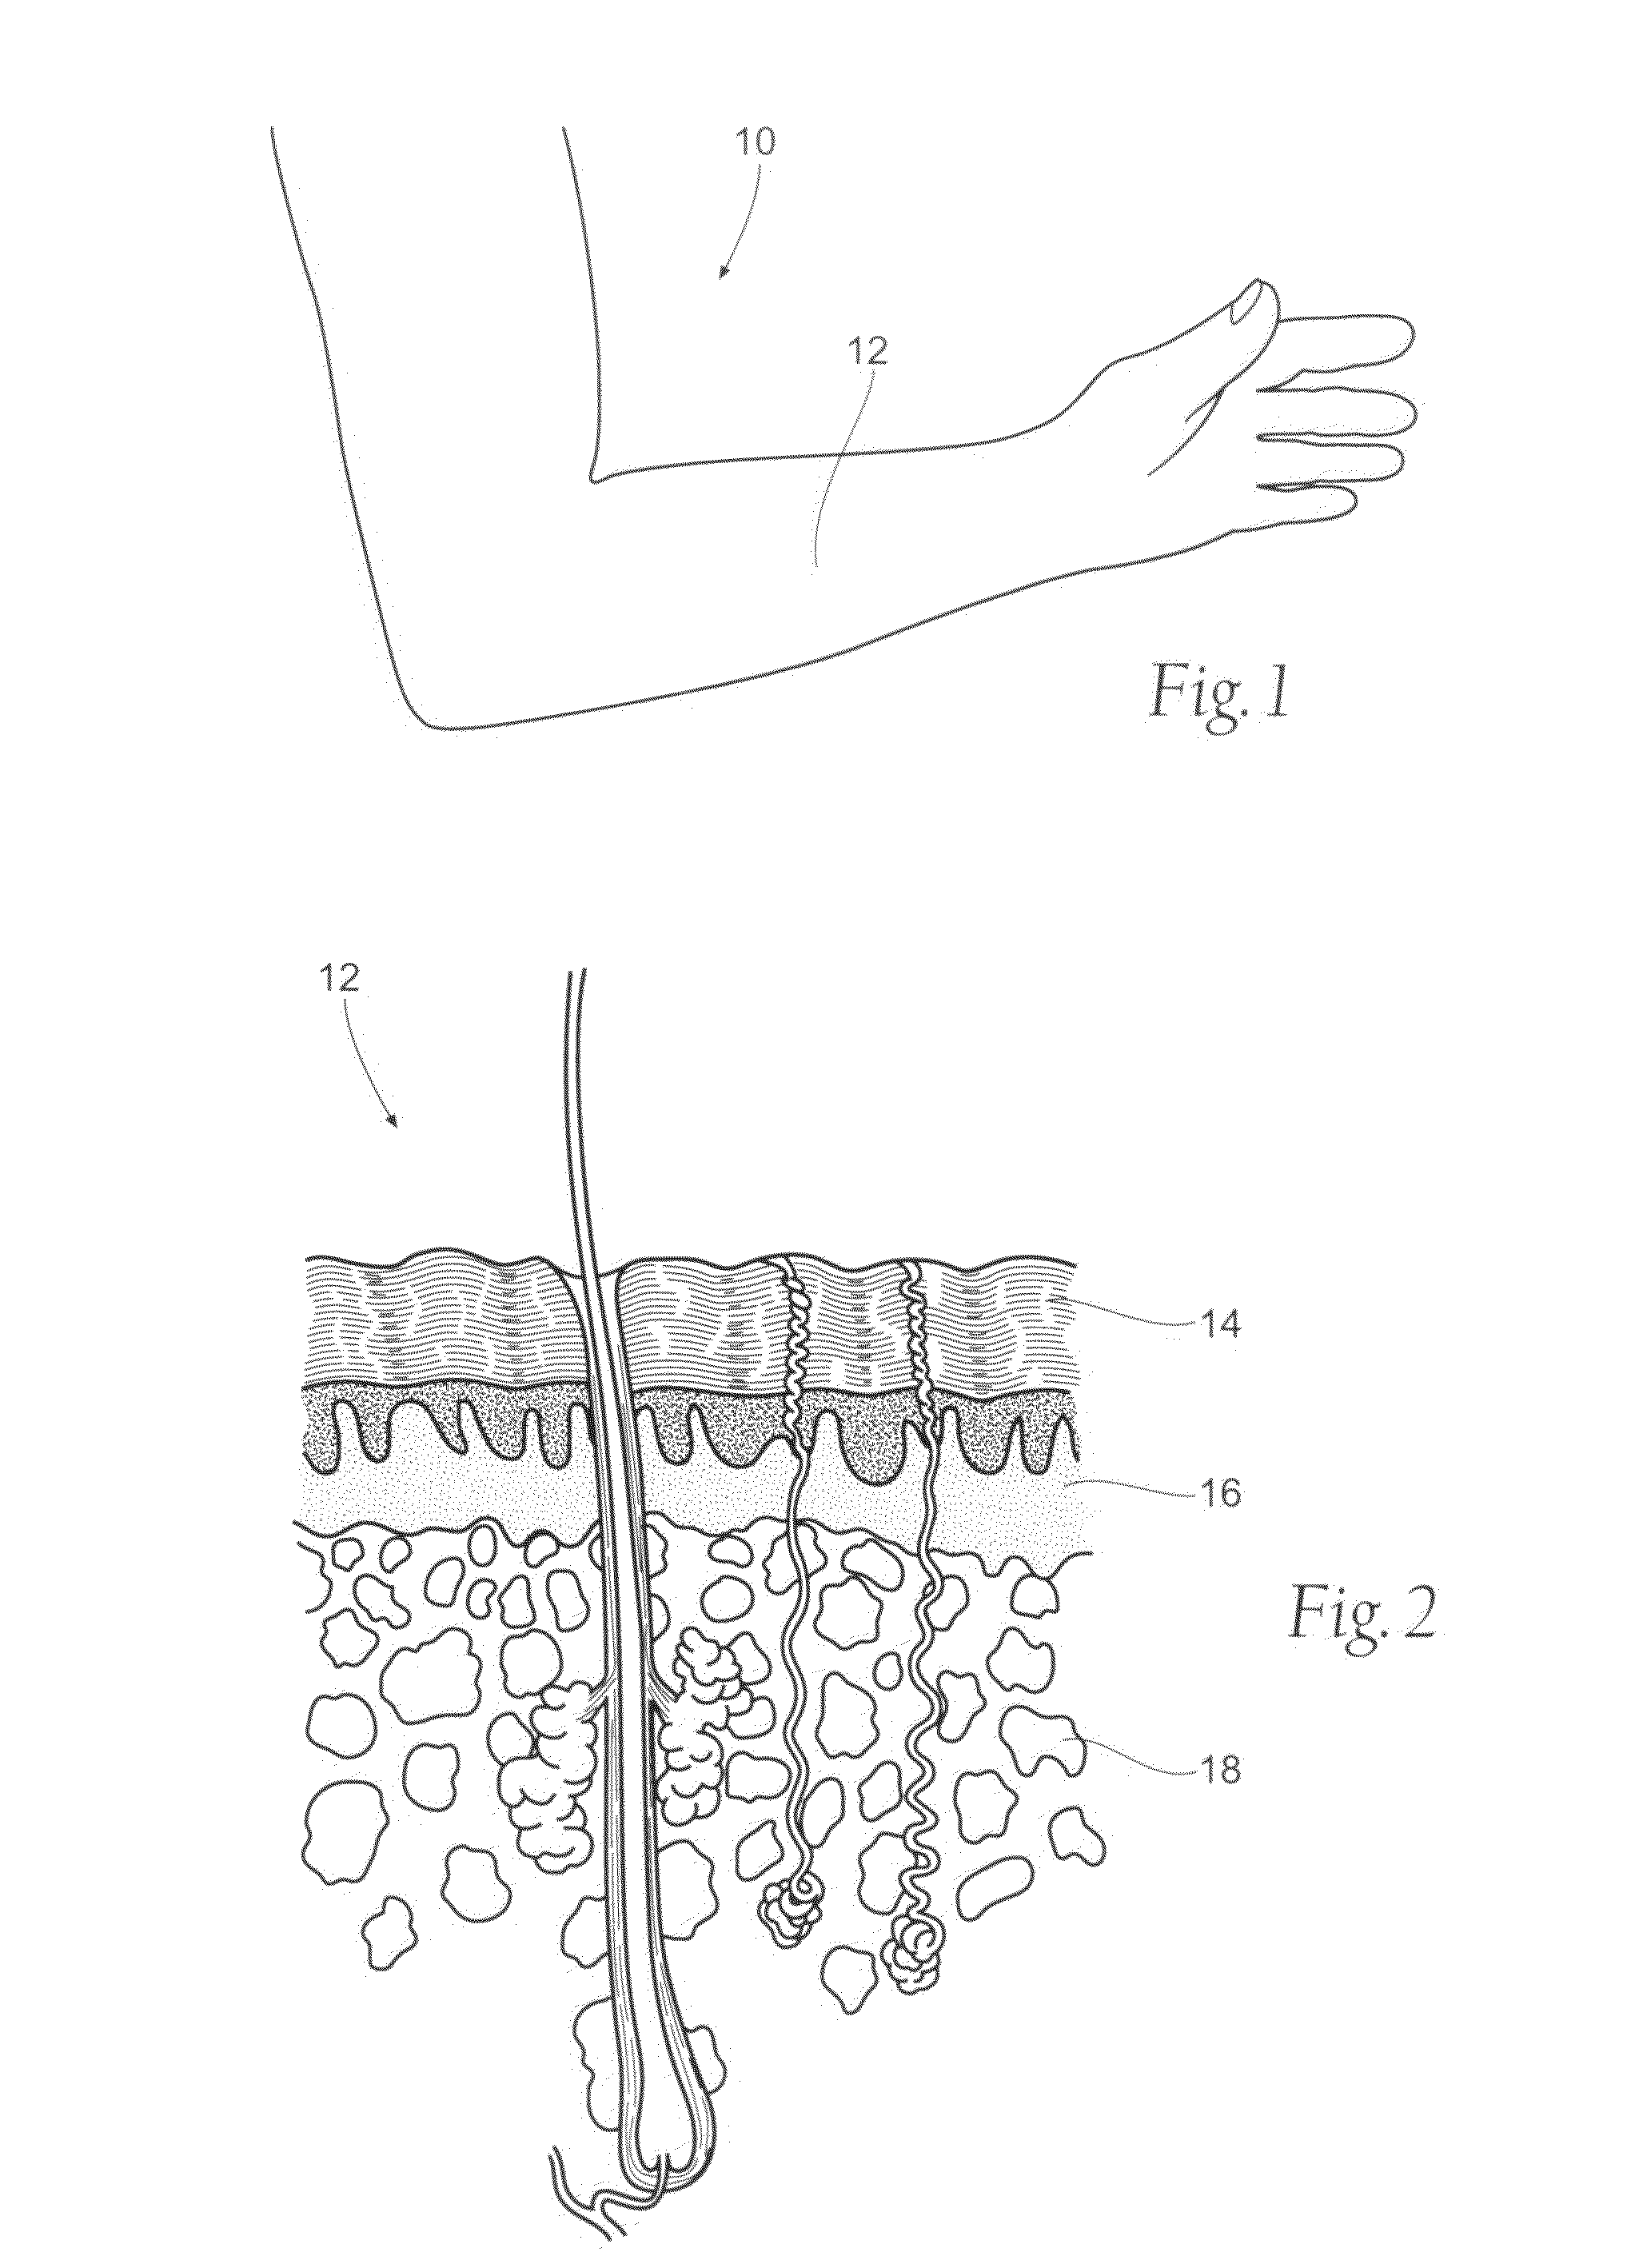 Assemblies, systems, and methods for skin treatment incorporating oxidized cellulose